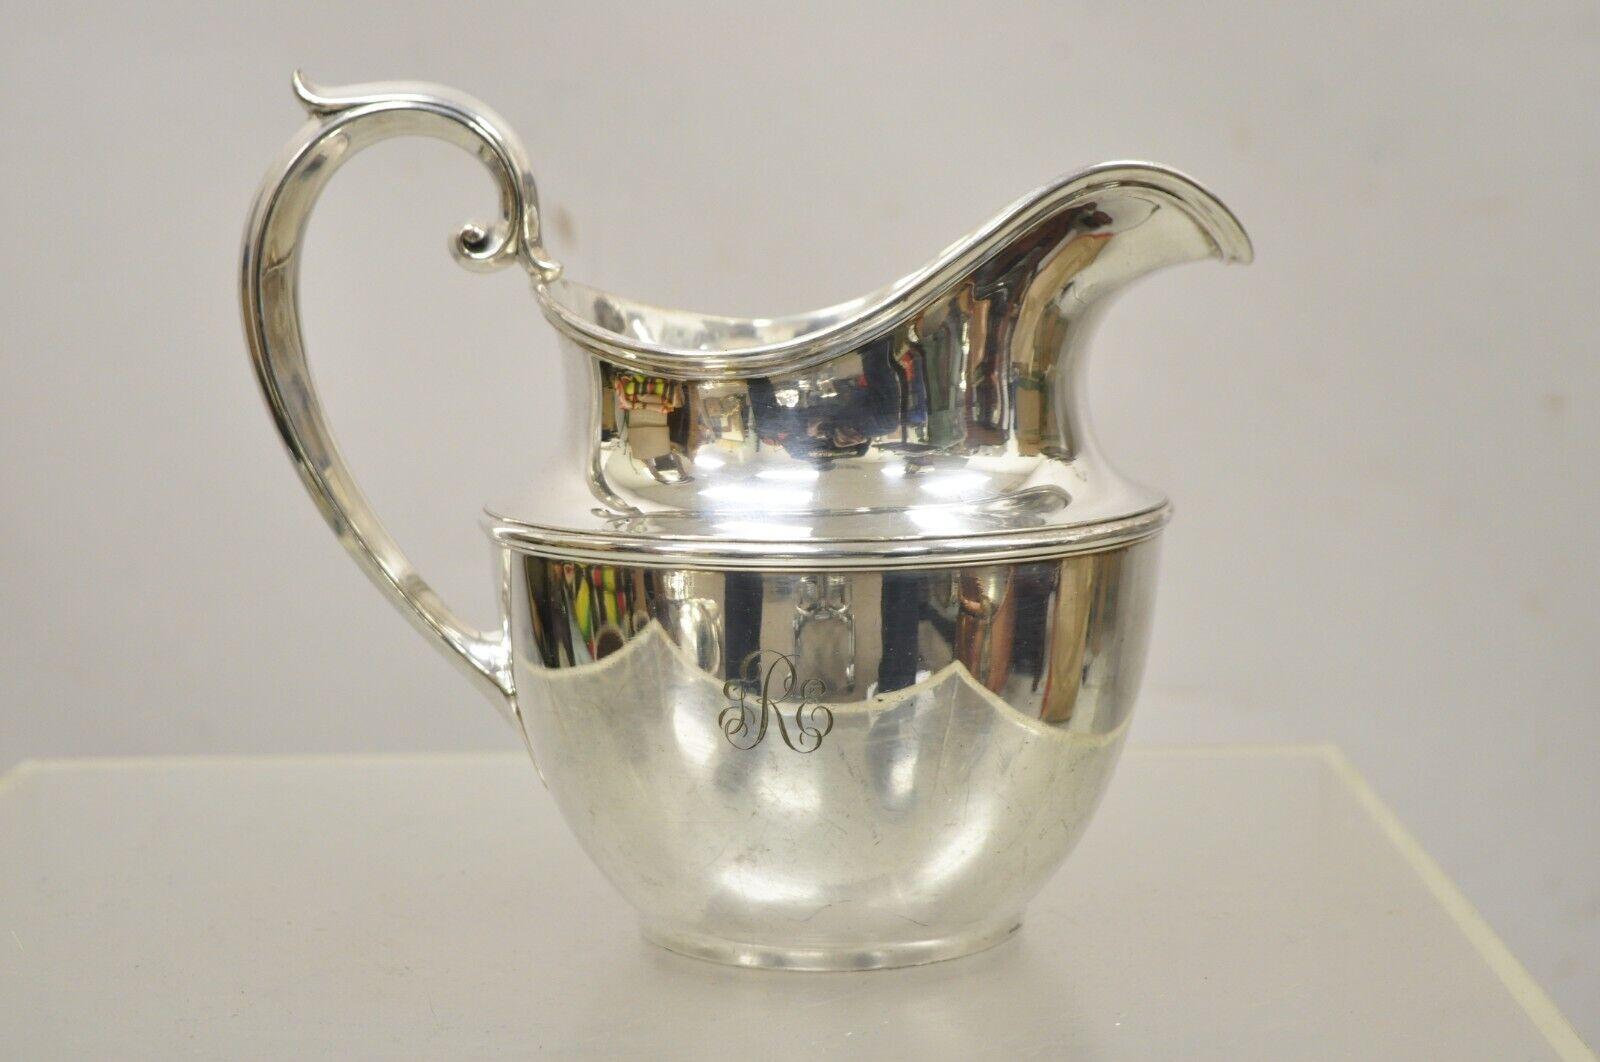 Antique GM Co. Silver Plated Victorian Water Pitcher with Monogram. Item features 